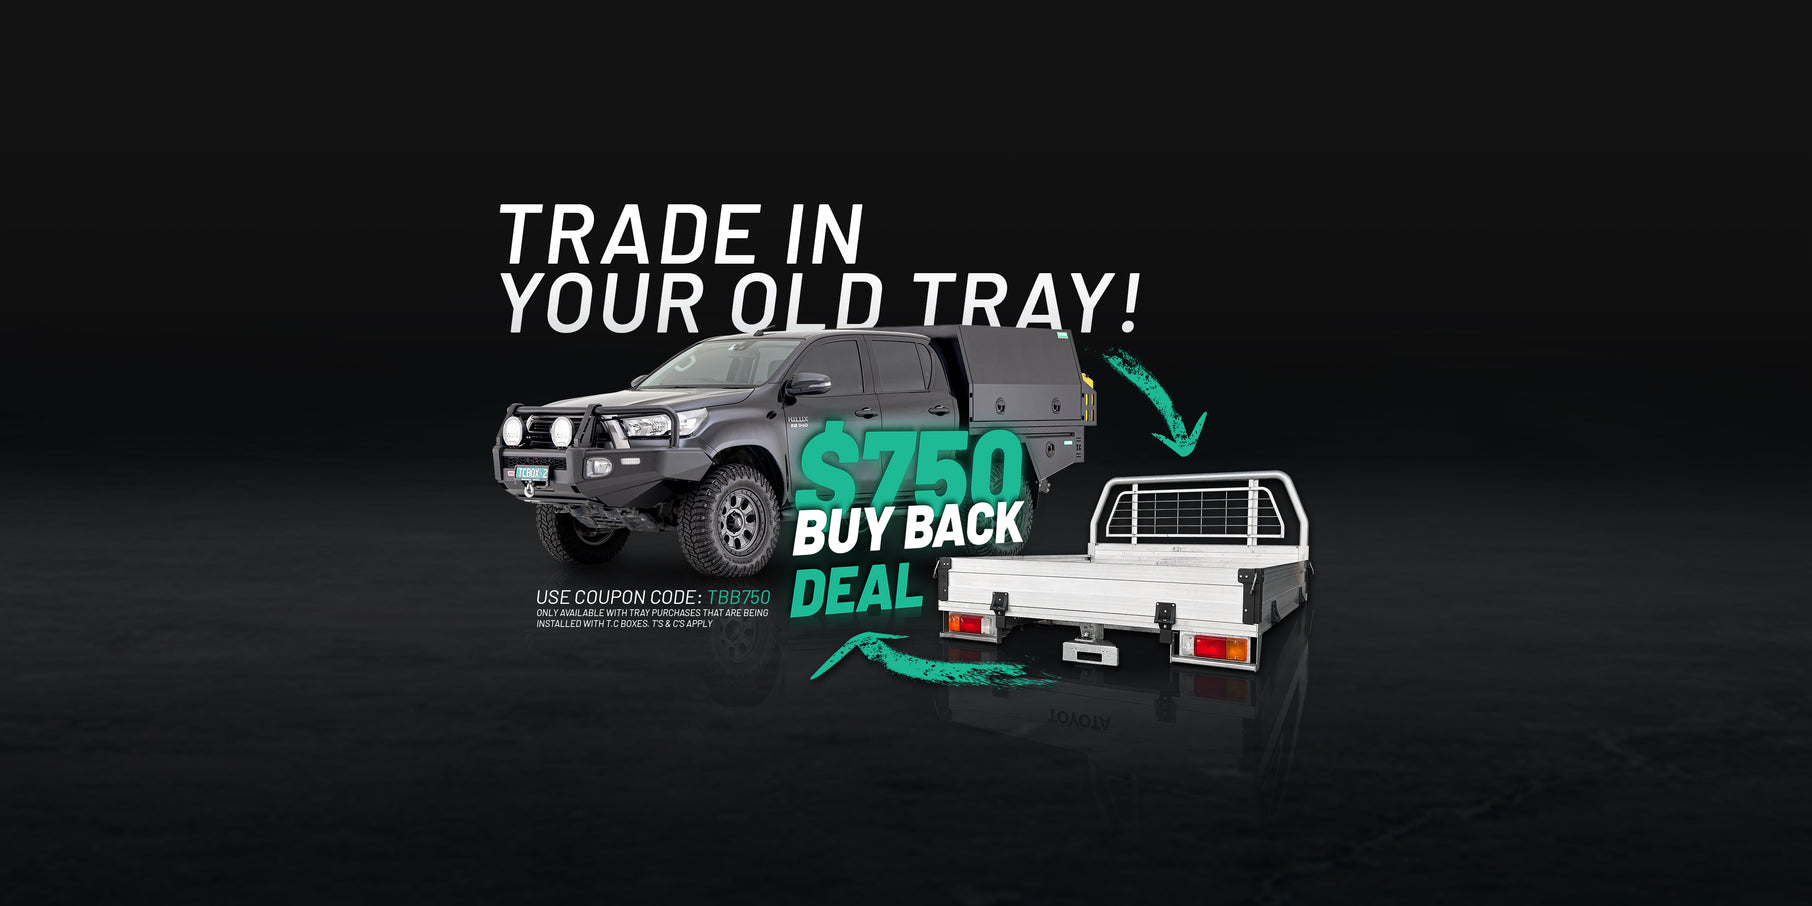 T.C Boxes - $750 Tray Buy Back Deal!